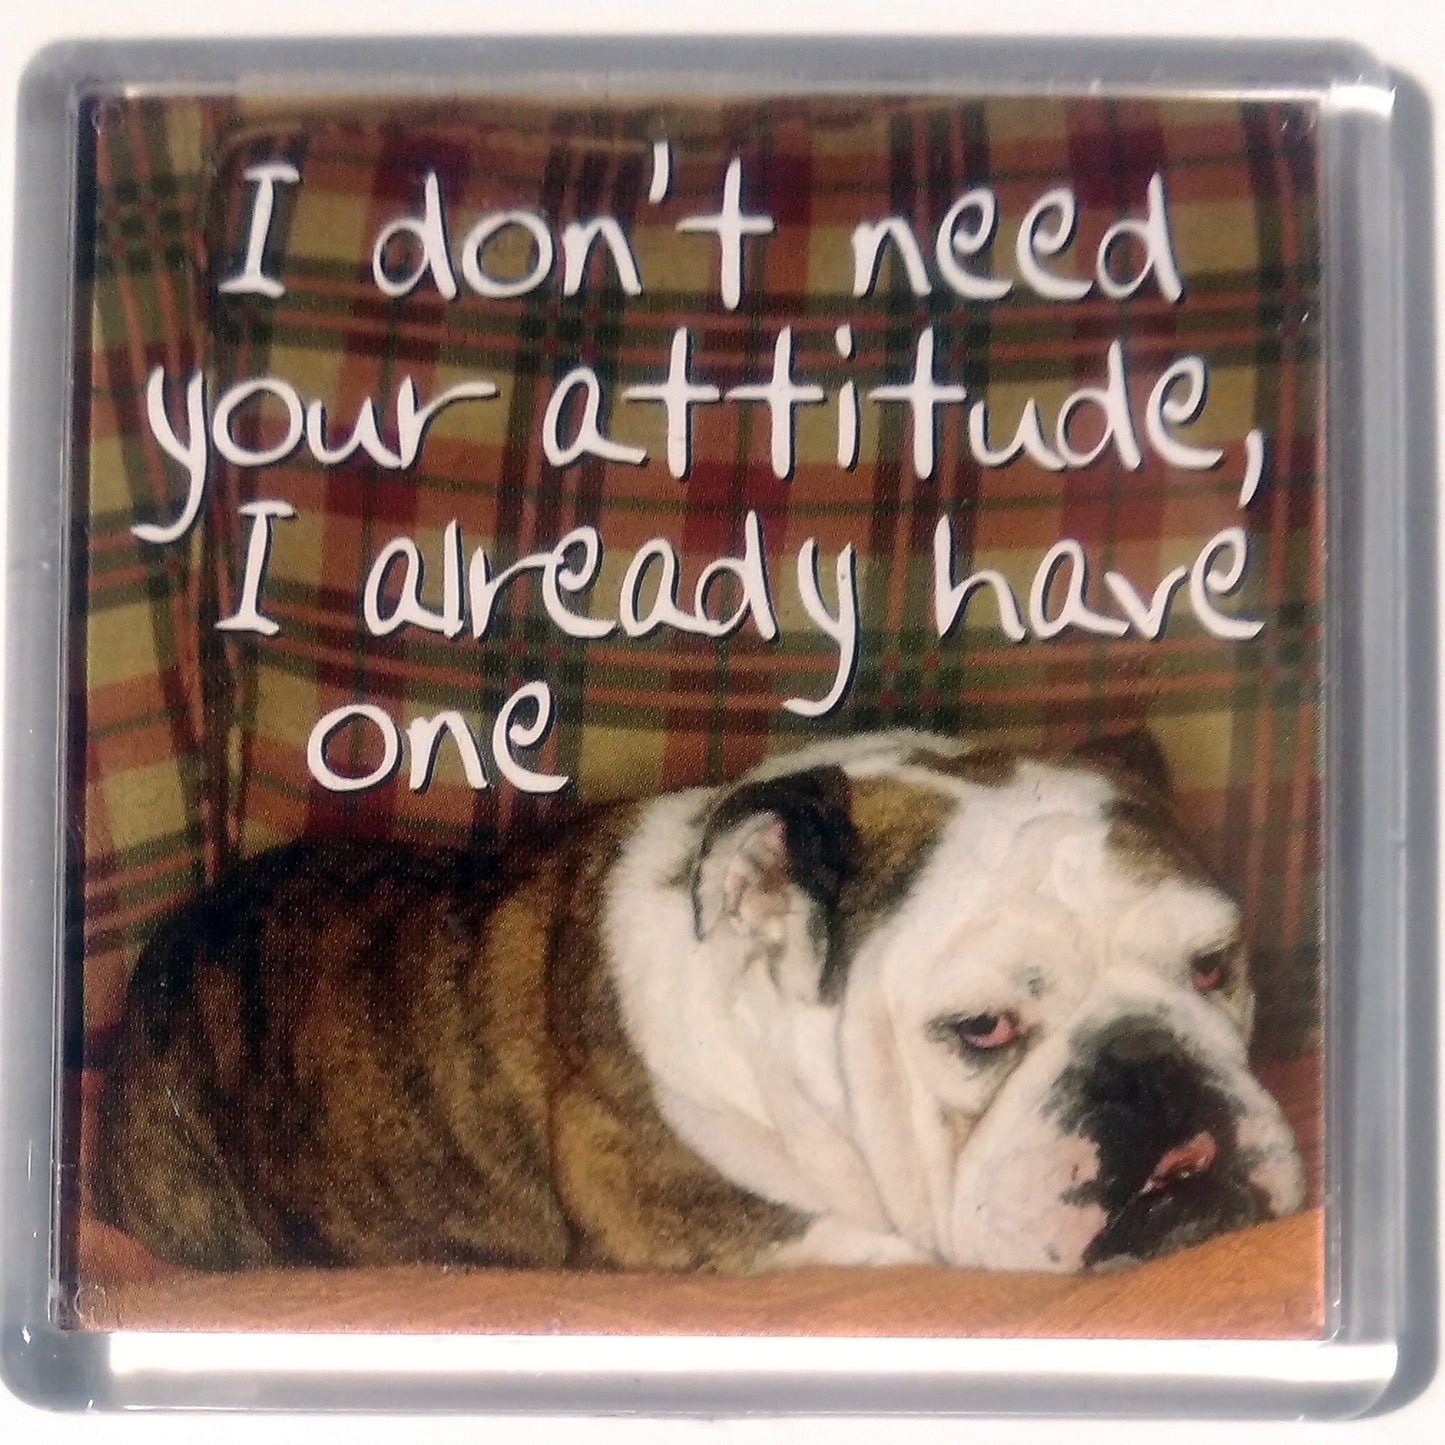 Heart And Home Sentiment Fridge Magnet - Animal/Humour MAG-161 / I don't need your attitude, I already have one